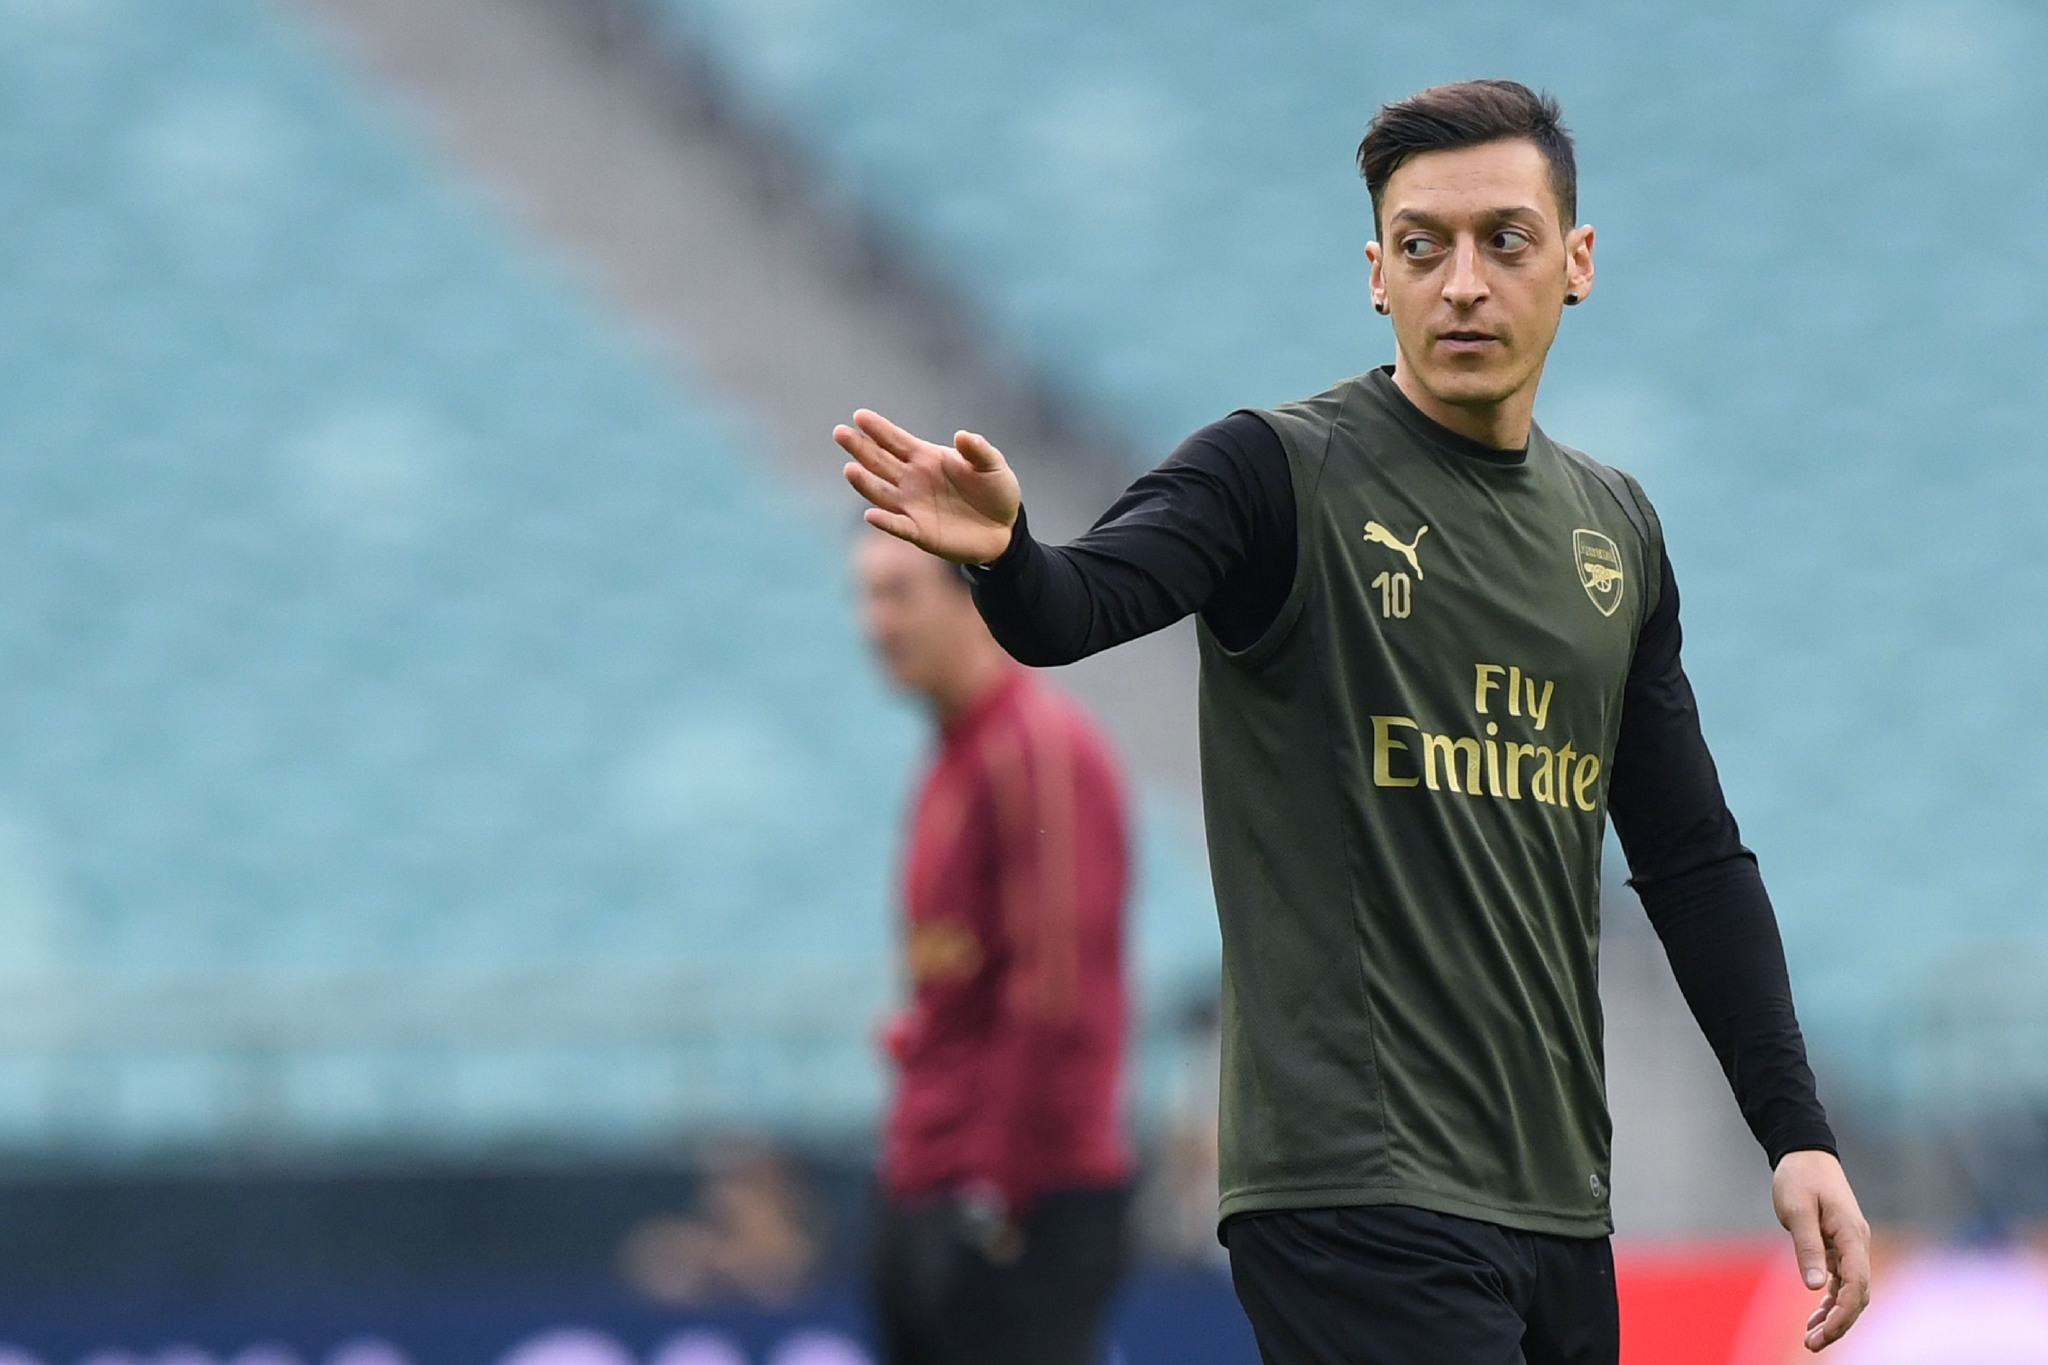 (FILES) In this file photo taken on May 28, 2019 Arsenals German midfielder Mesut <HIT>Ozil</HIT> attends a training session at the Baku Olympic Stadium in Baku on the eve of the UEFA Europa League final football match between Chelsea and Arsenal. - Arsenal footballers Sead Kolasinac and Mesut <HIT>Ozil</HIT> fought off knife-wielding car-jackers in a terrifying ordeal in London captured on video circulated on social media on July 25, 2019. (Photo by Kirill KUDRYAVTSEV / AFP)